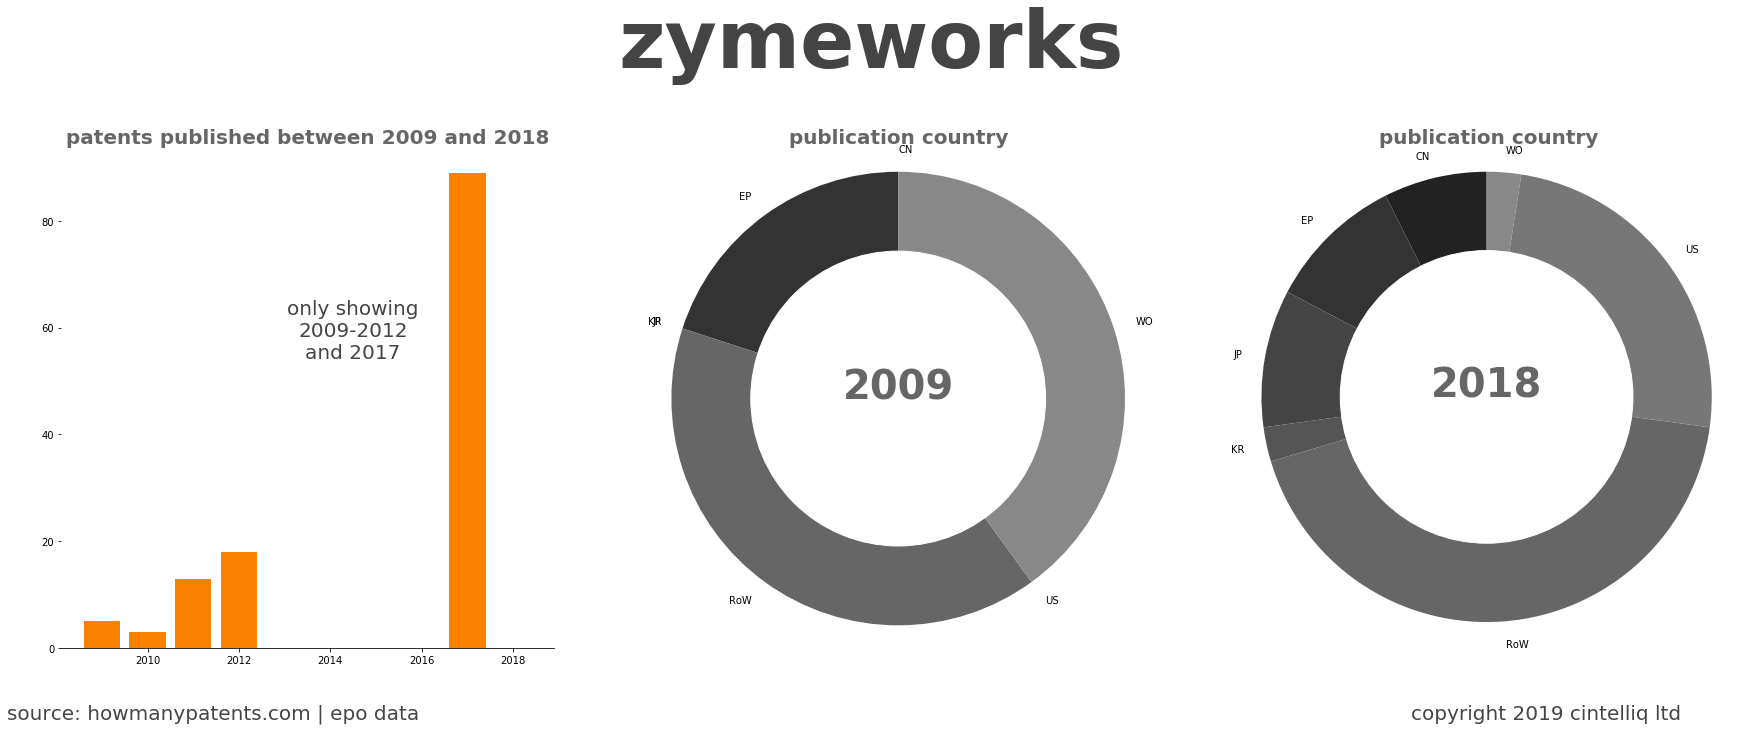 summary of patents for Zymeworks